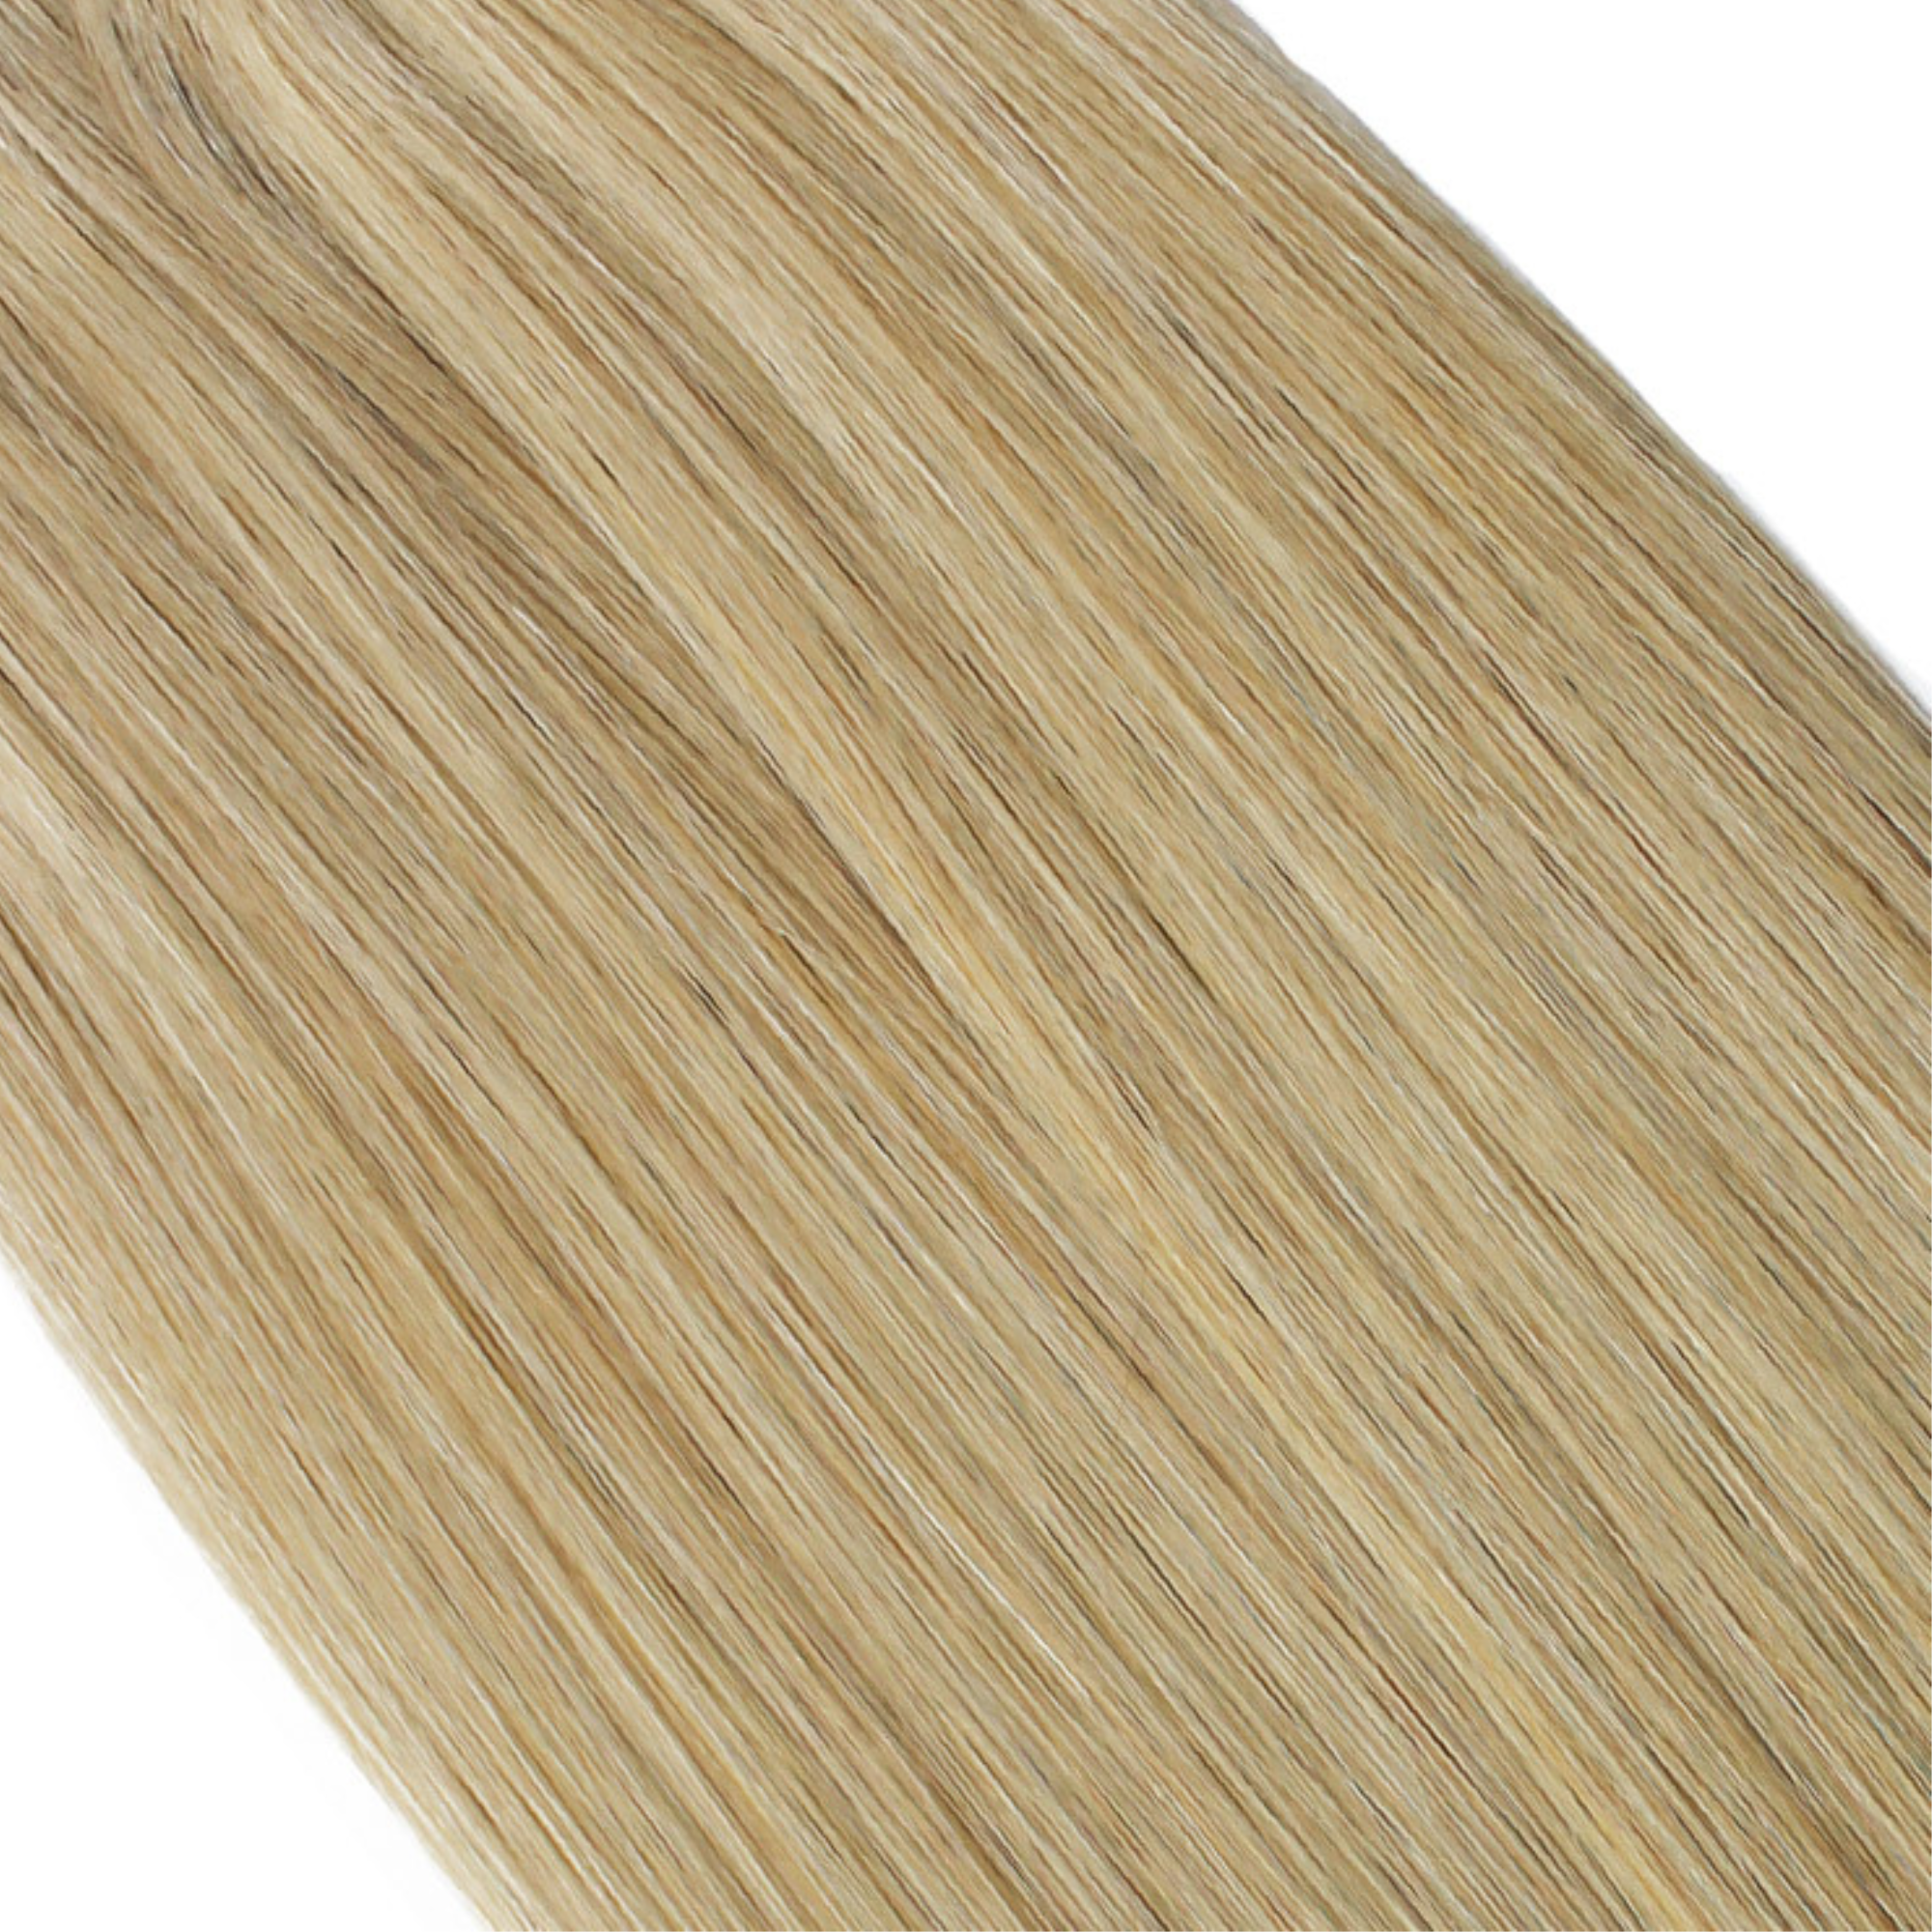 "hair rehab london 18" weft hair extensions shade swatch titled dirty blonde"